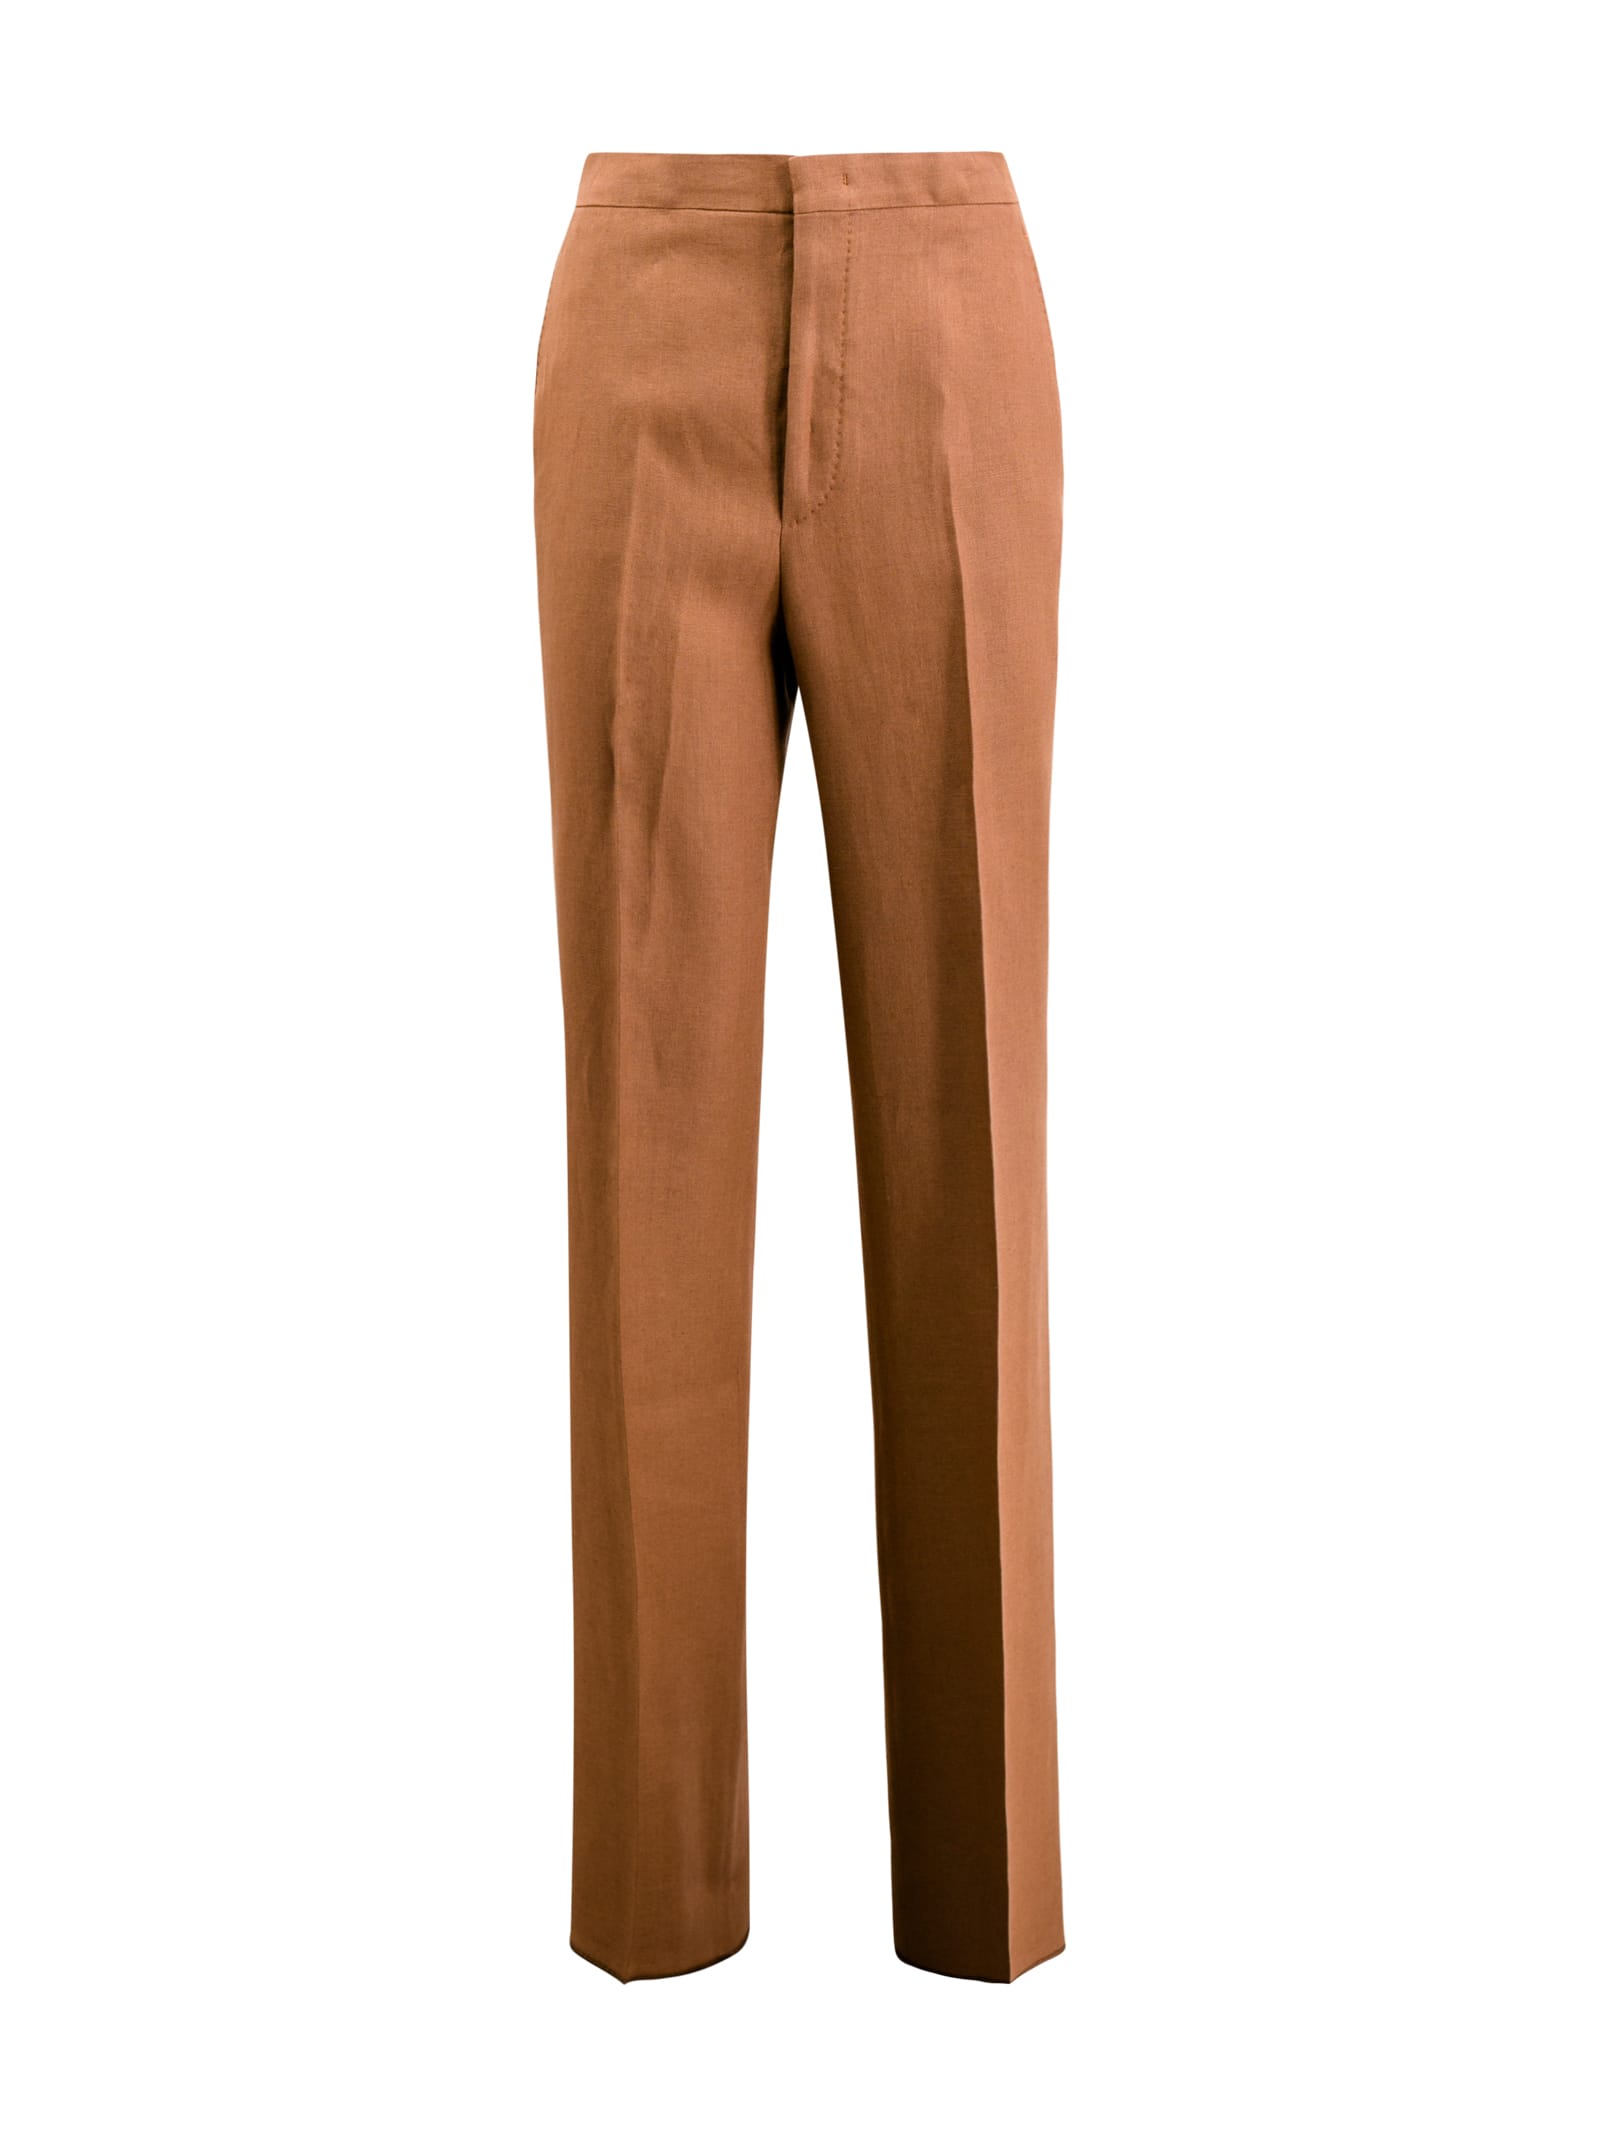 Shop Tagliatore Full Suit With Double-breasted Blazer With Peaked Lapels And Straight Pants. In Brown